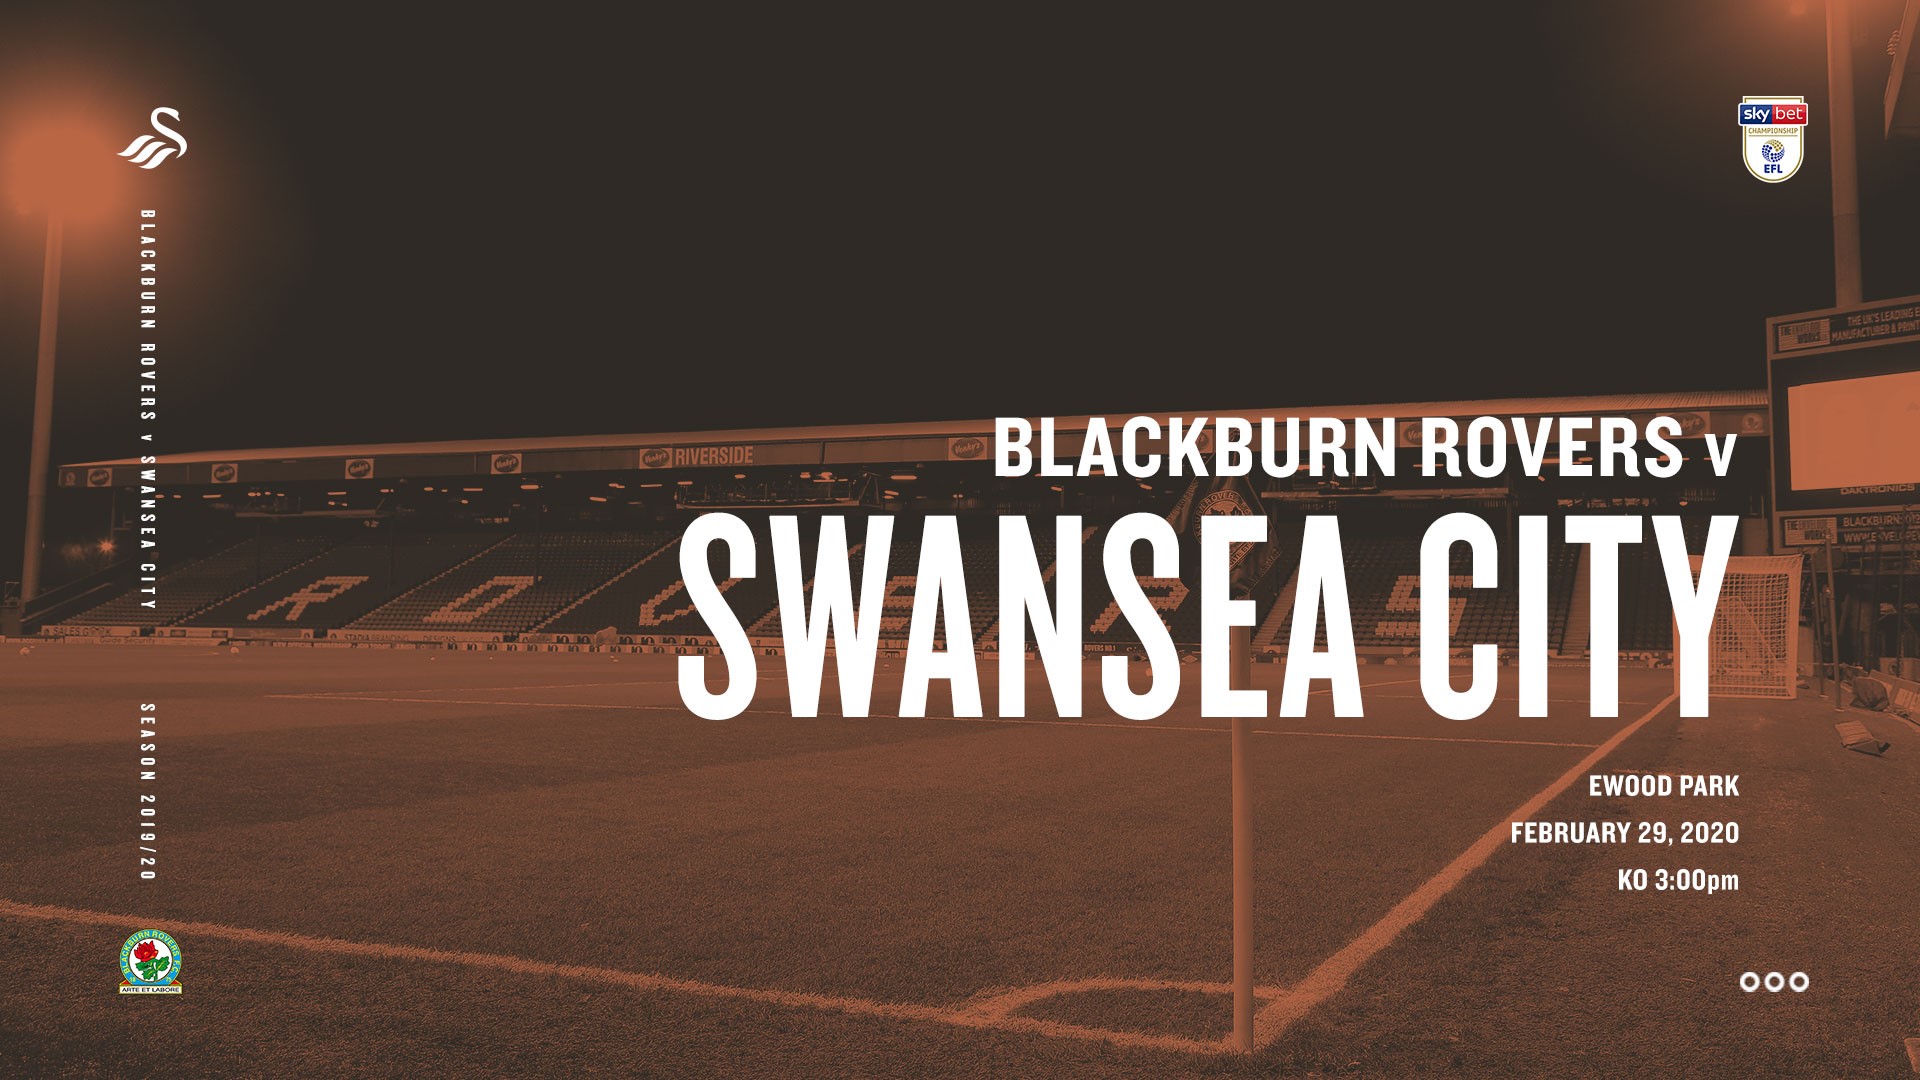 Blackburn away preview graphic